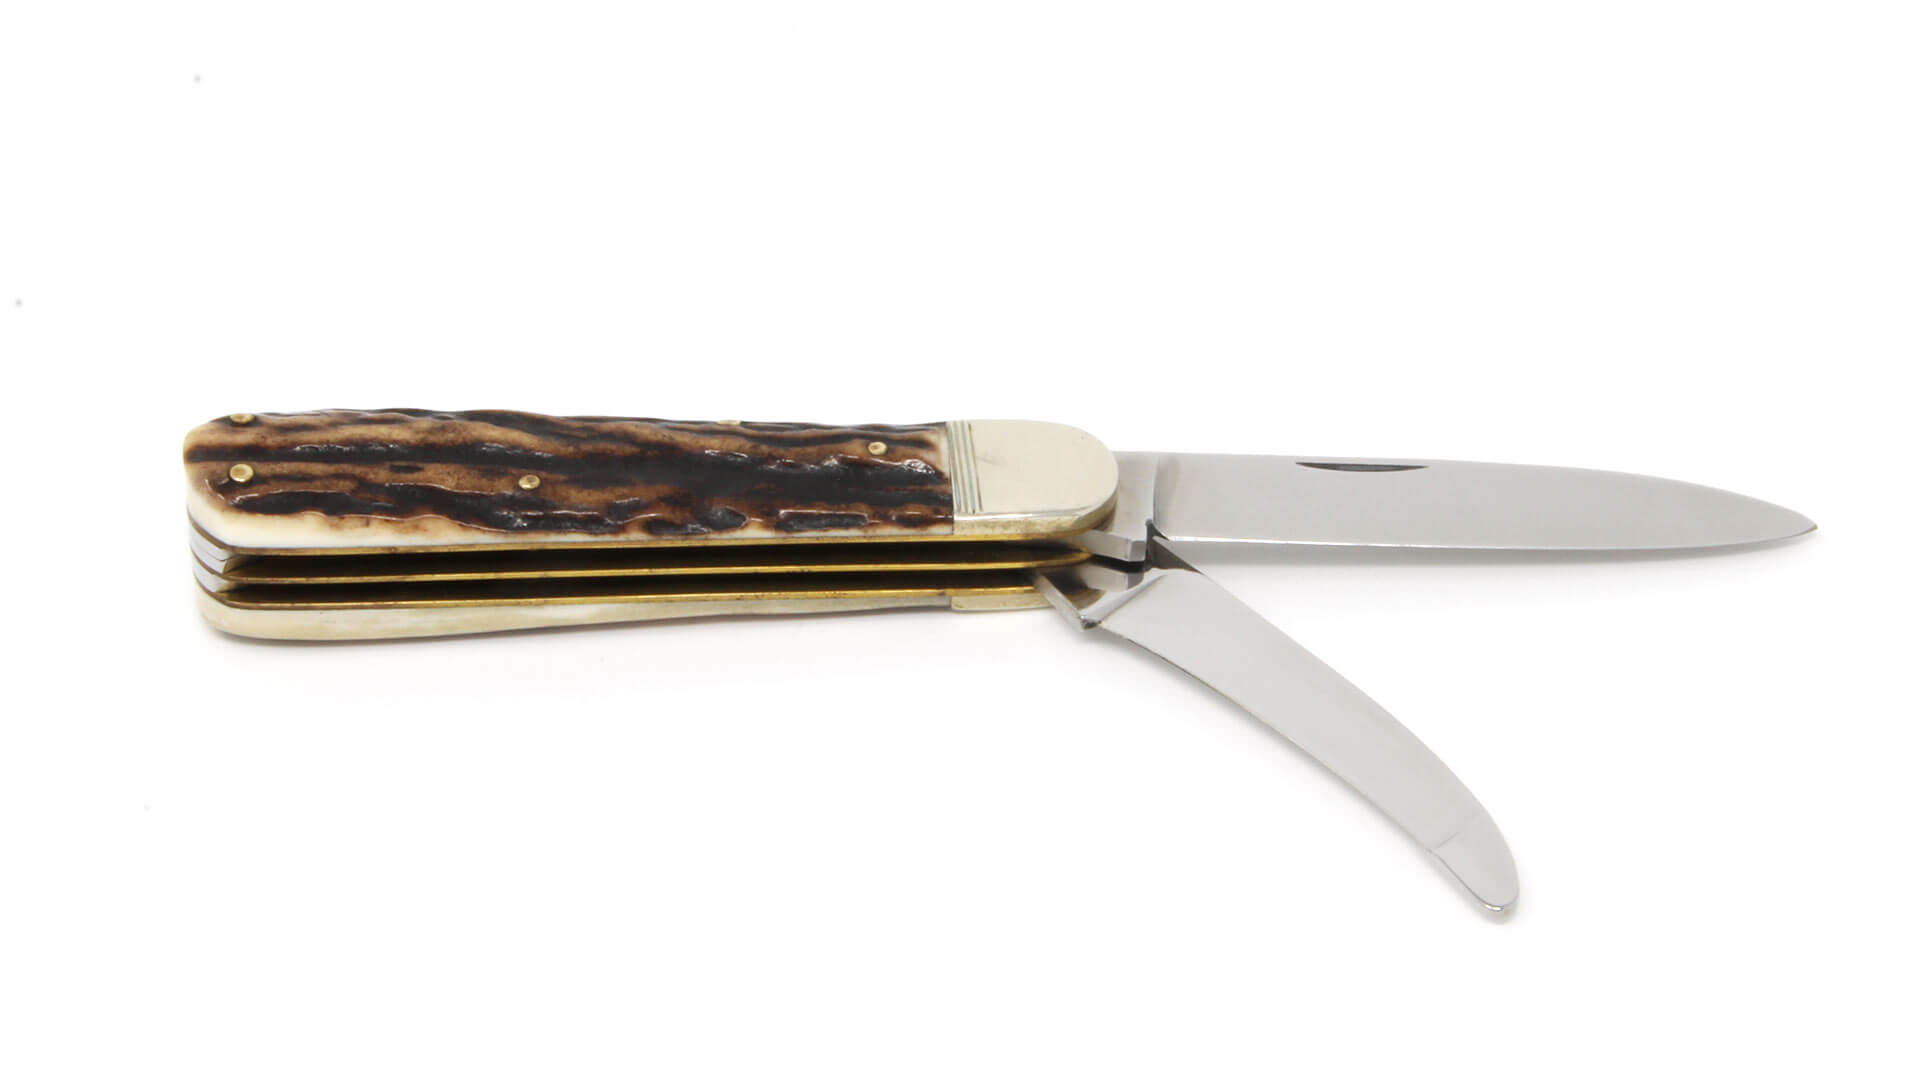 Hubertus Series 12 hunting pocket knife with woad blade and corkscrew unfolded